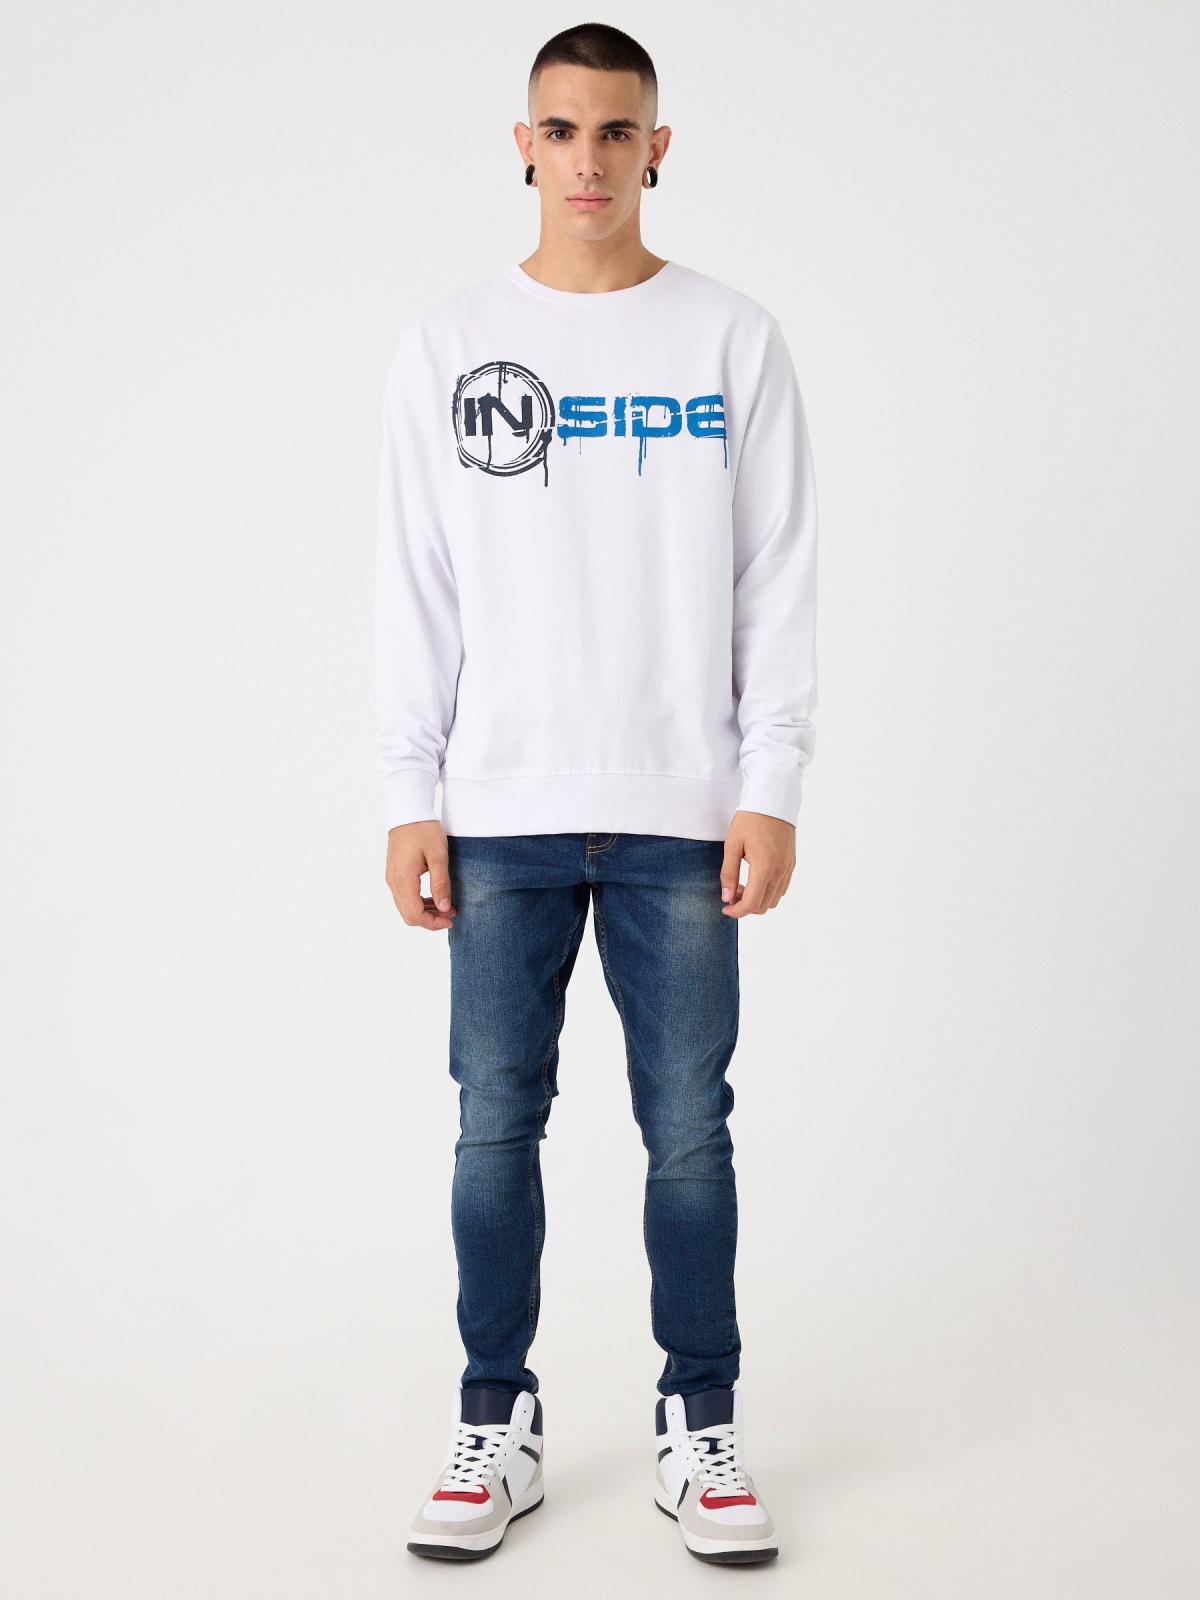 Hoodless sweatshirt with logo white front view